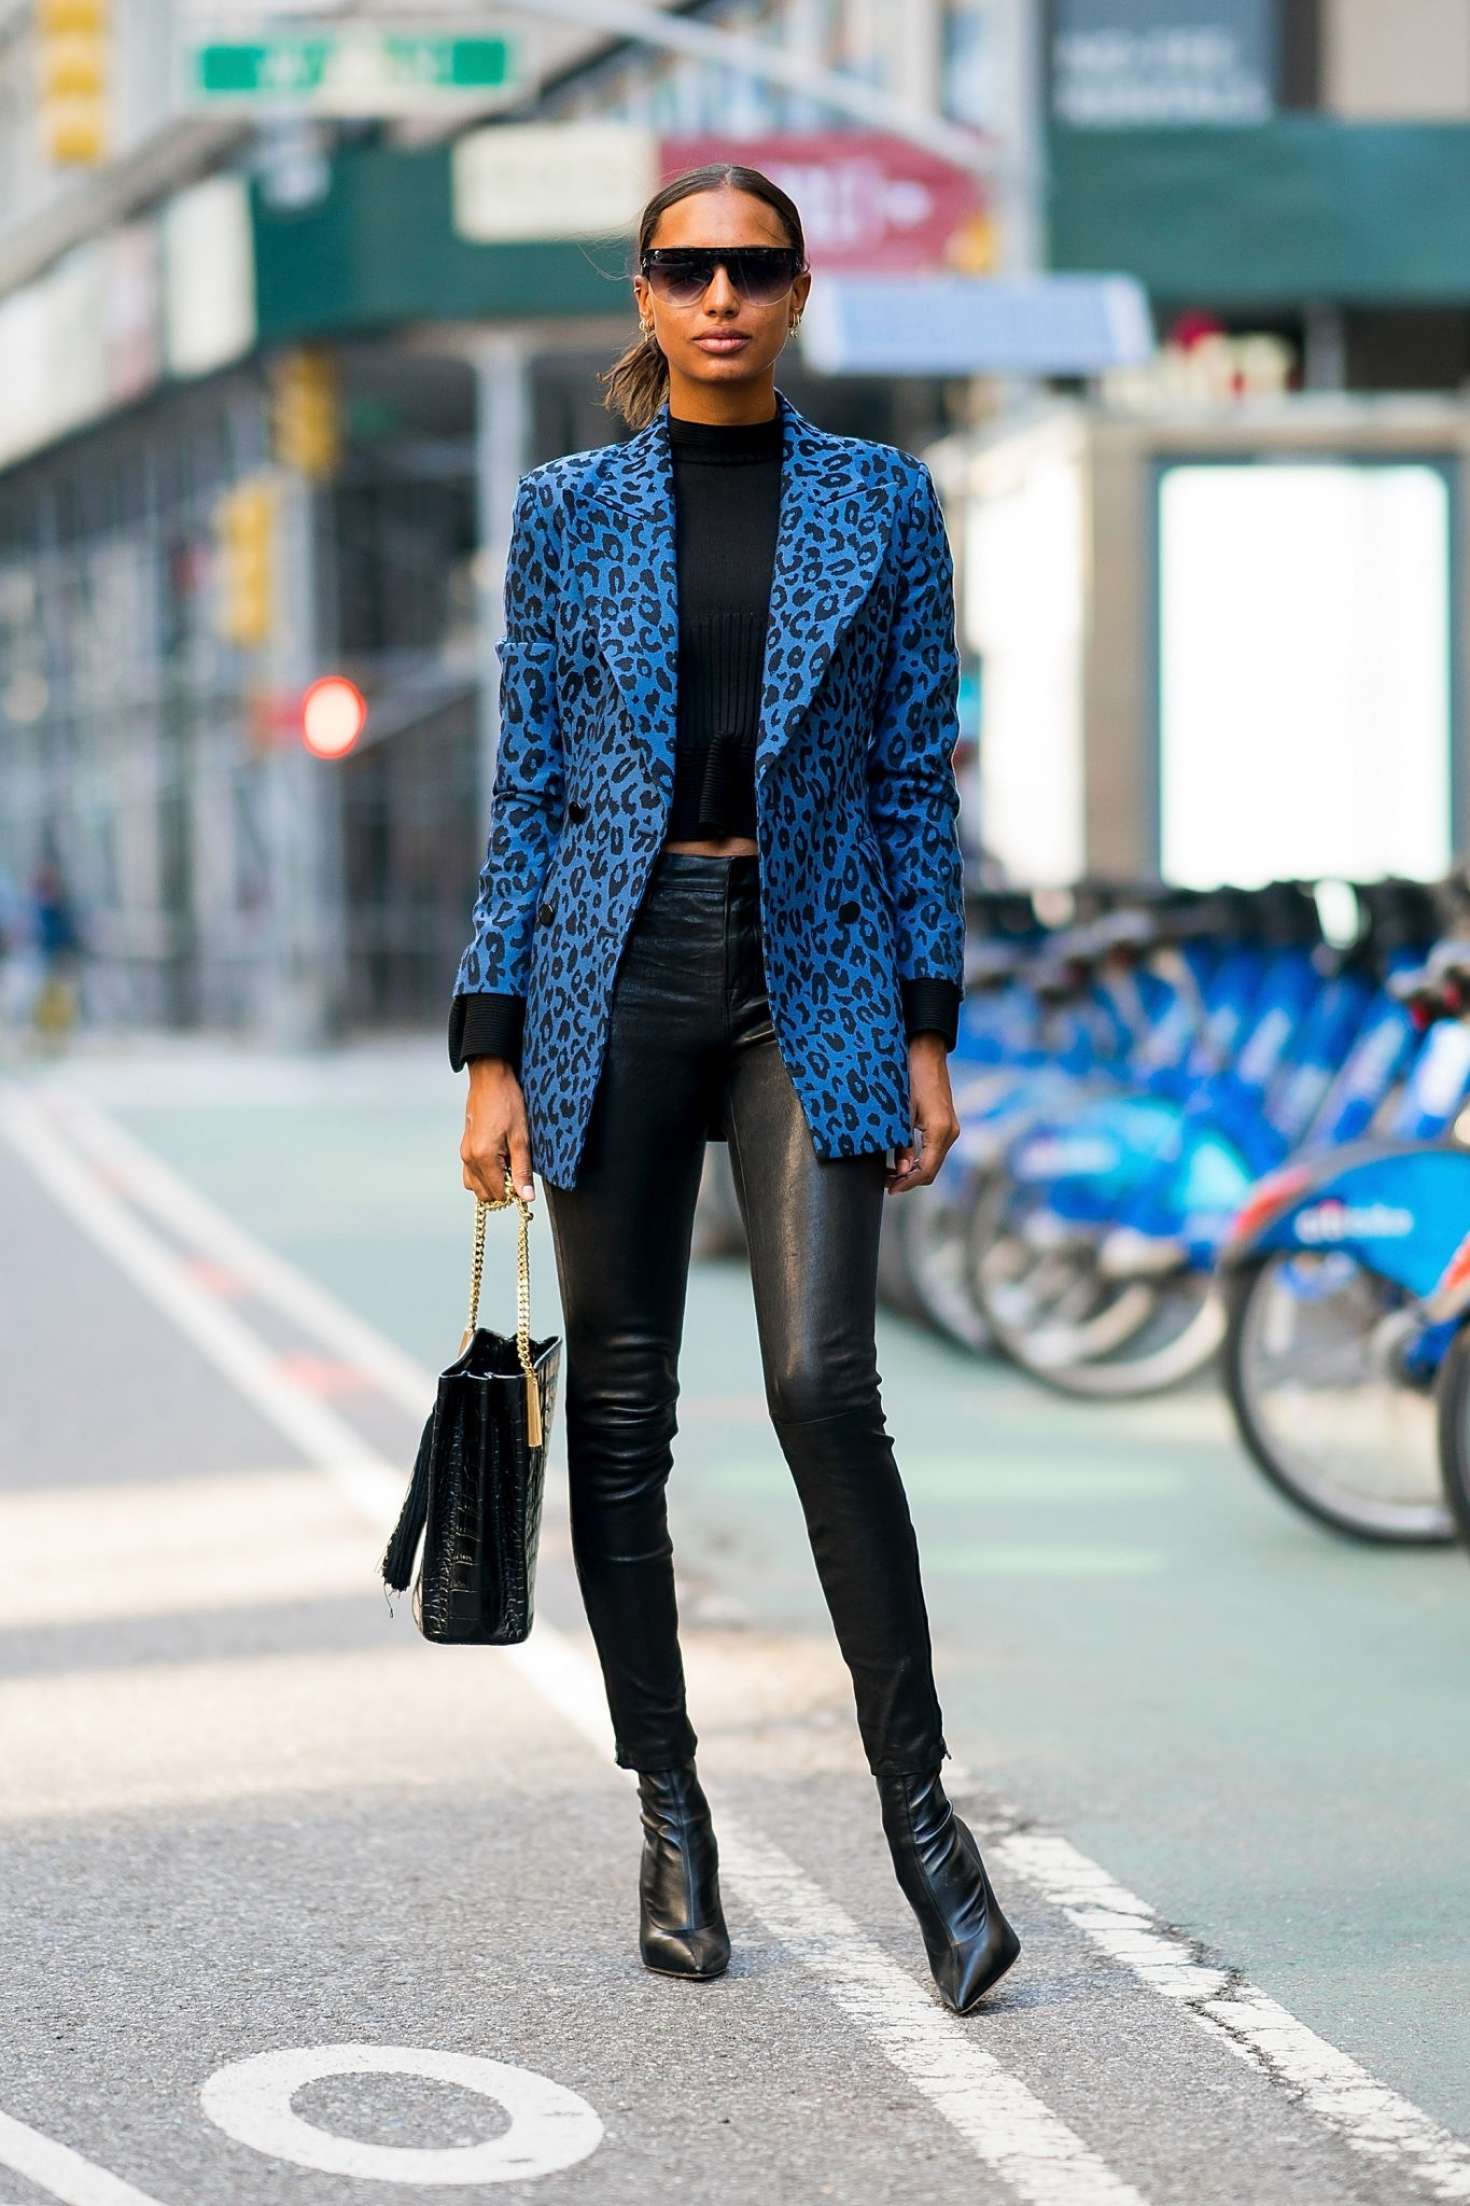 Jasmine Tookes - Arriving at the Victoria's Secret offices for fittings in NY